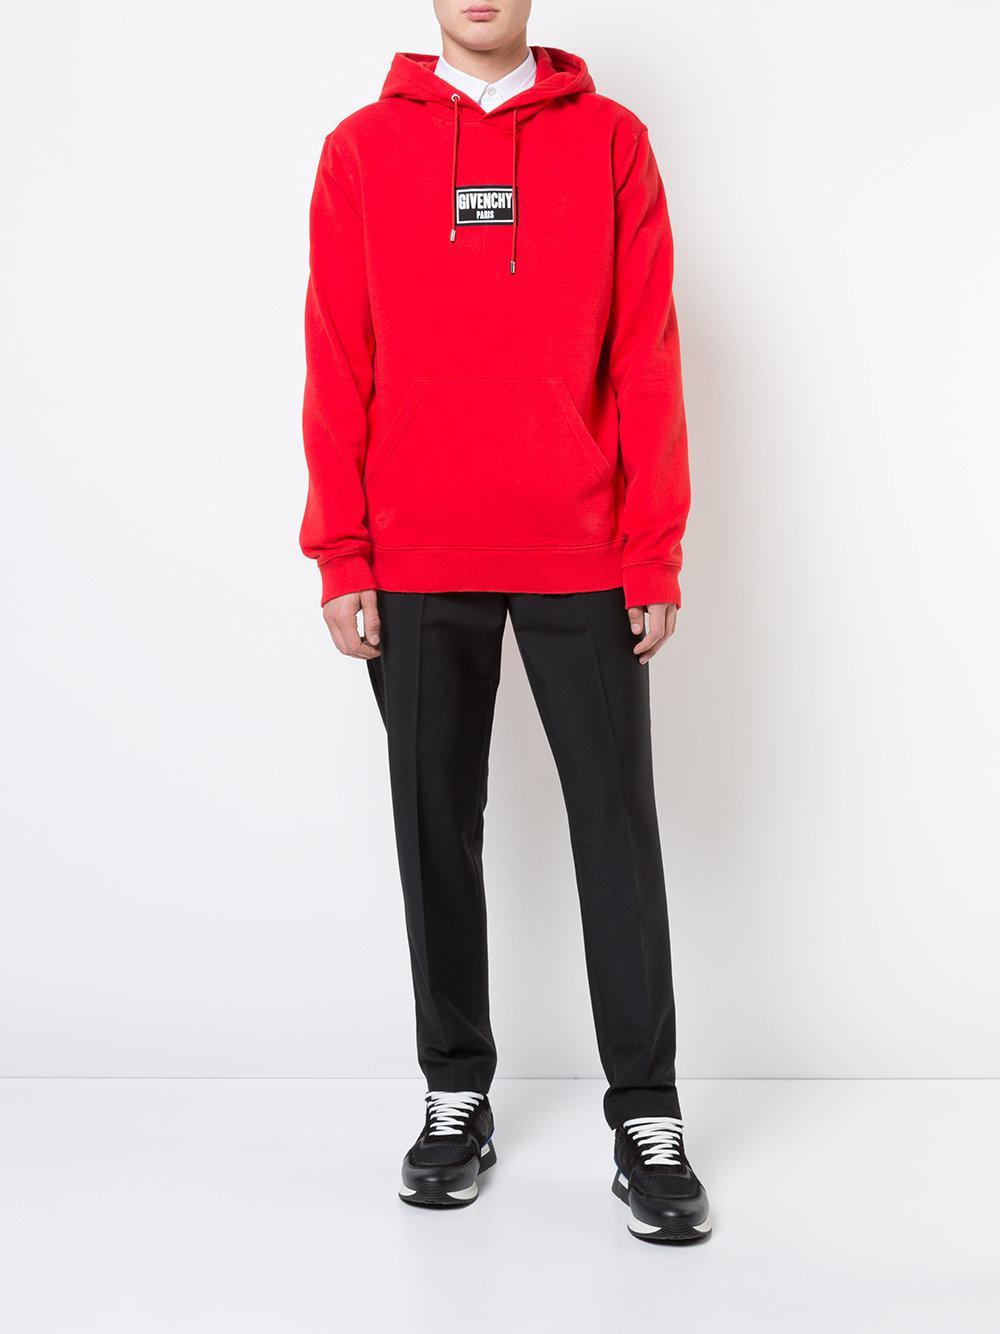 Givenchy Cotton Destroyed Hoodie in Red for Men - Lyst